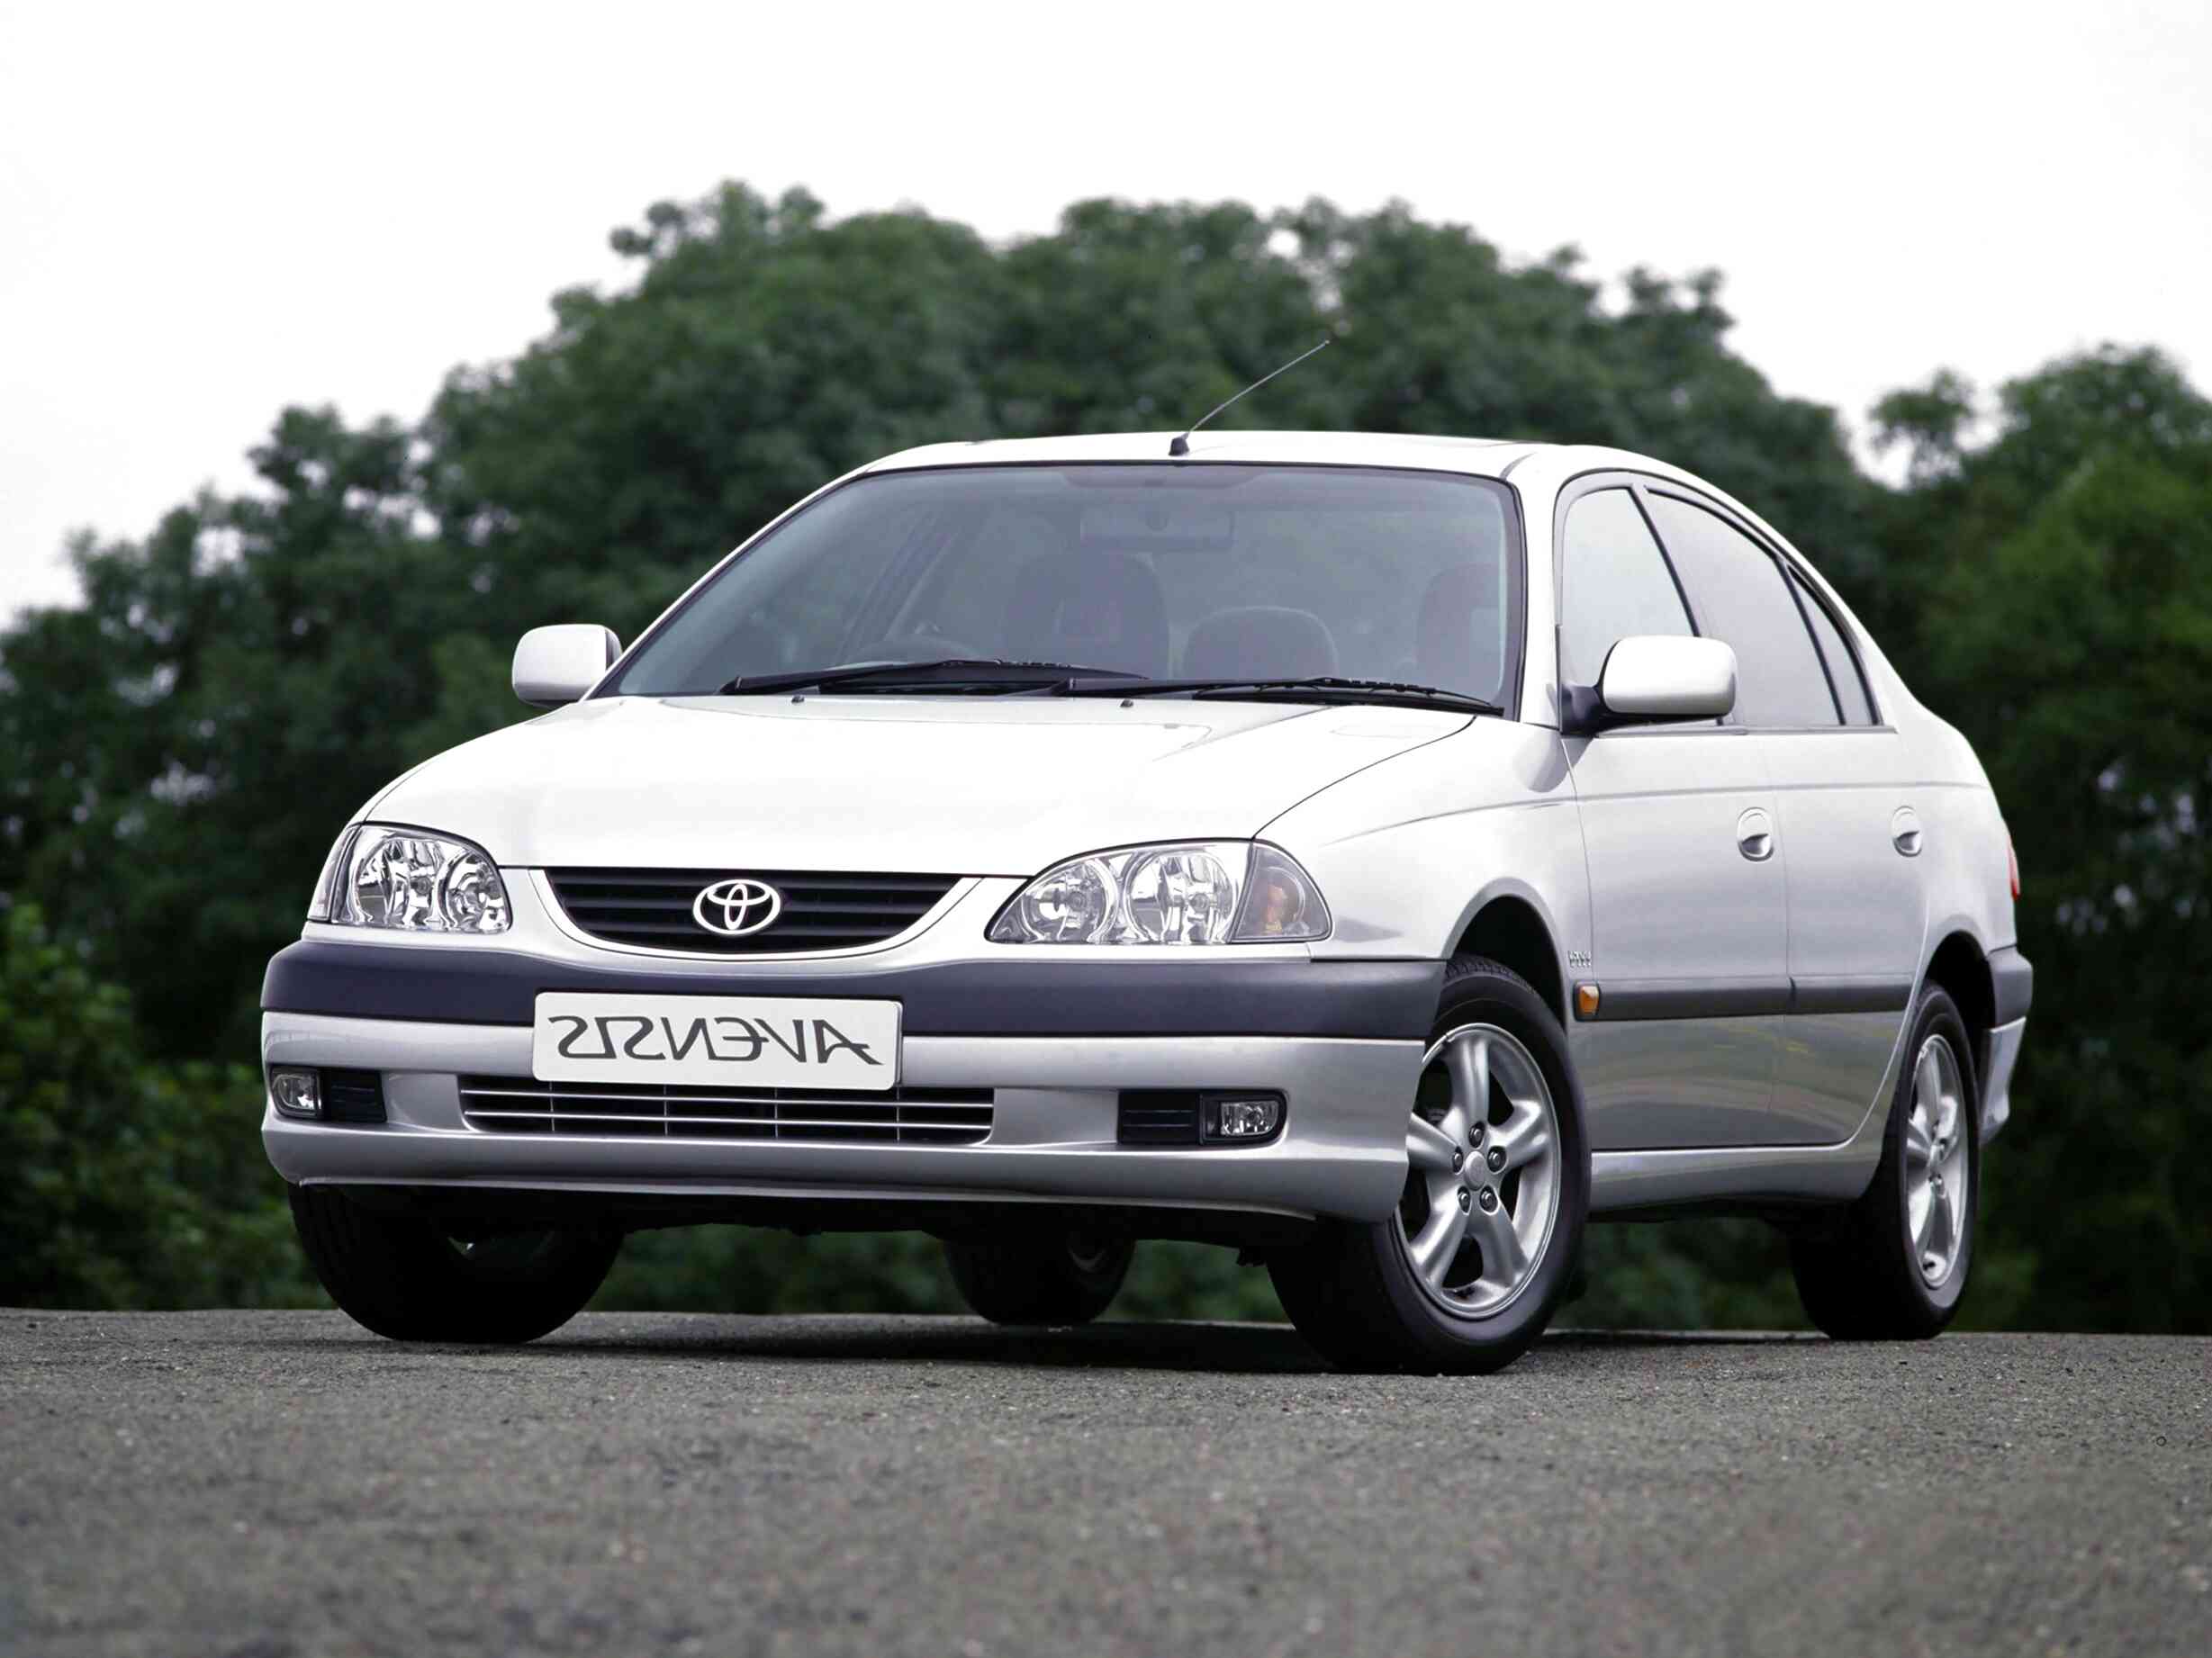 2000 Toyota Avensis for sale in UK View 54 bargains